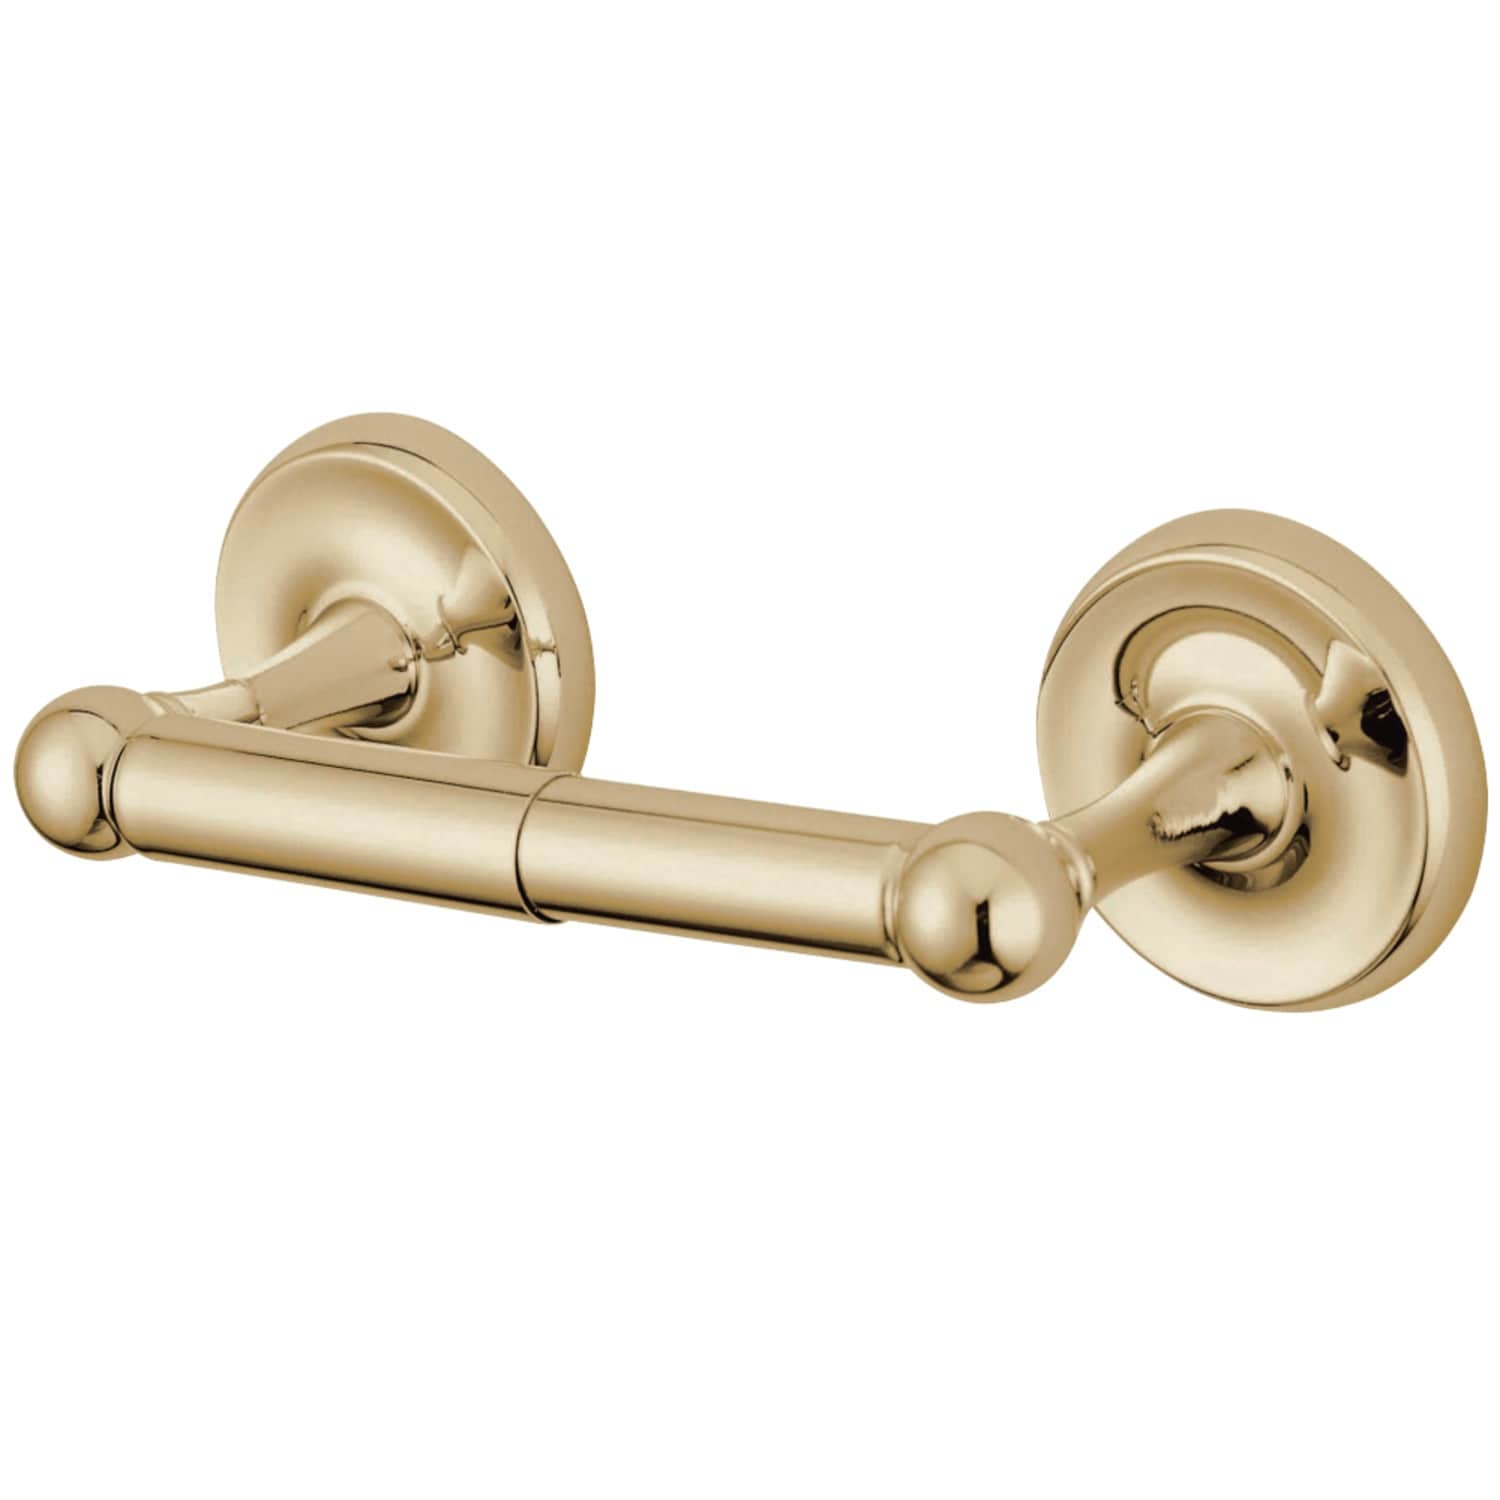 Interbath Wall Mounted Single Arm Toilet Paper Holder in Stainless Steel Brushed Gold (Set of 2)